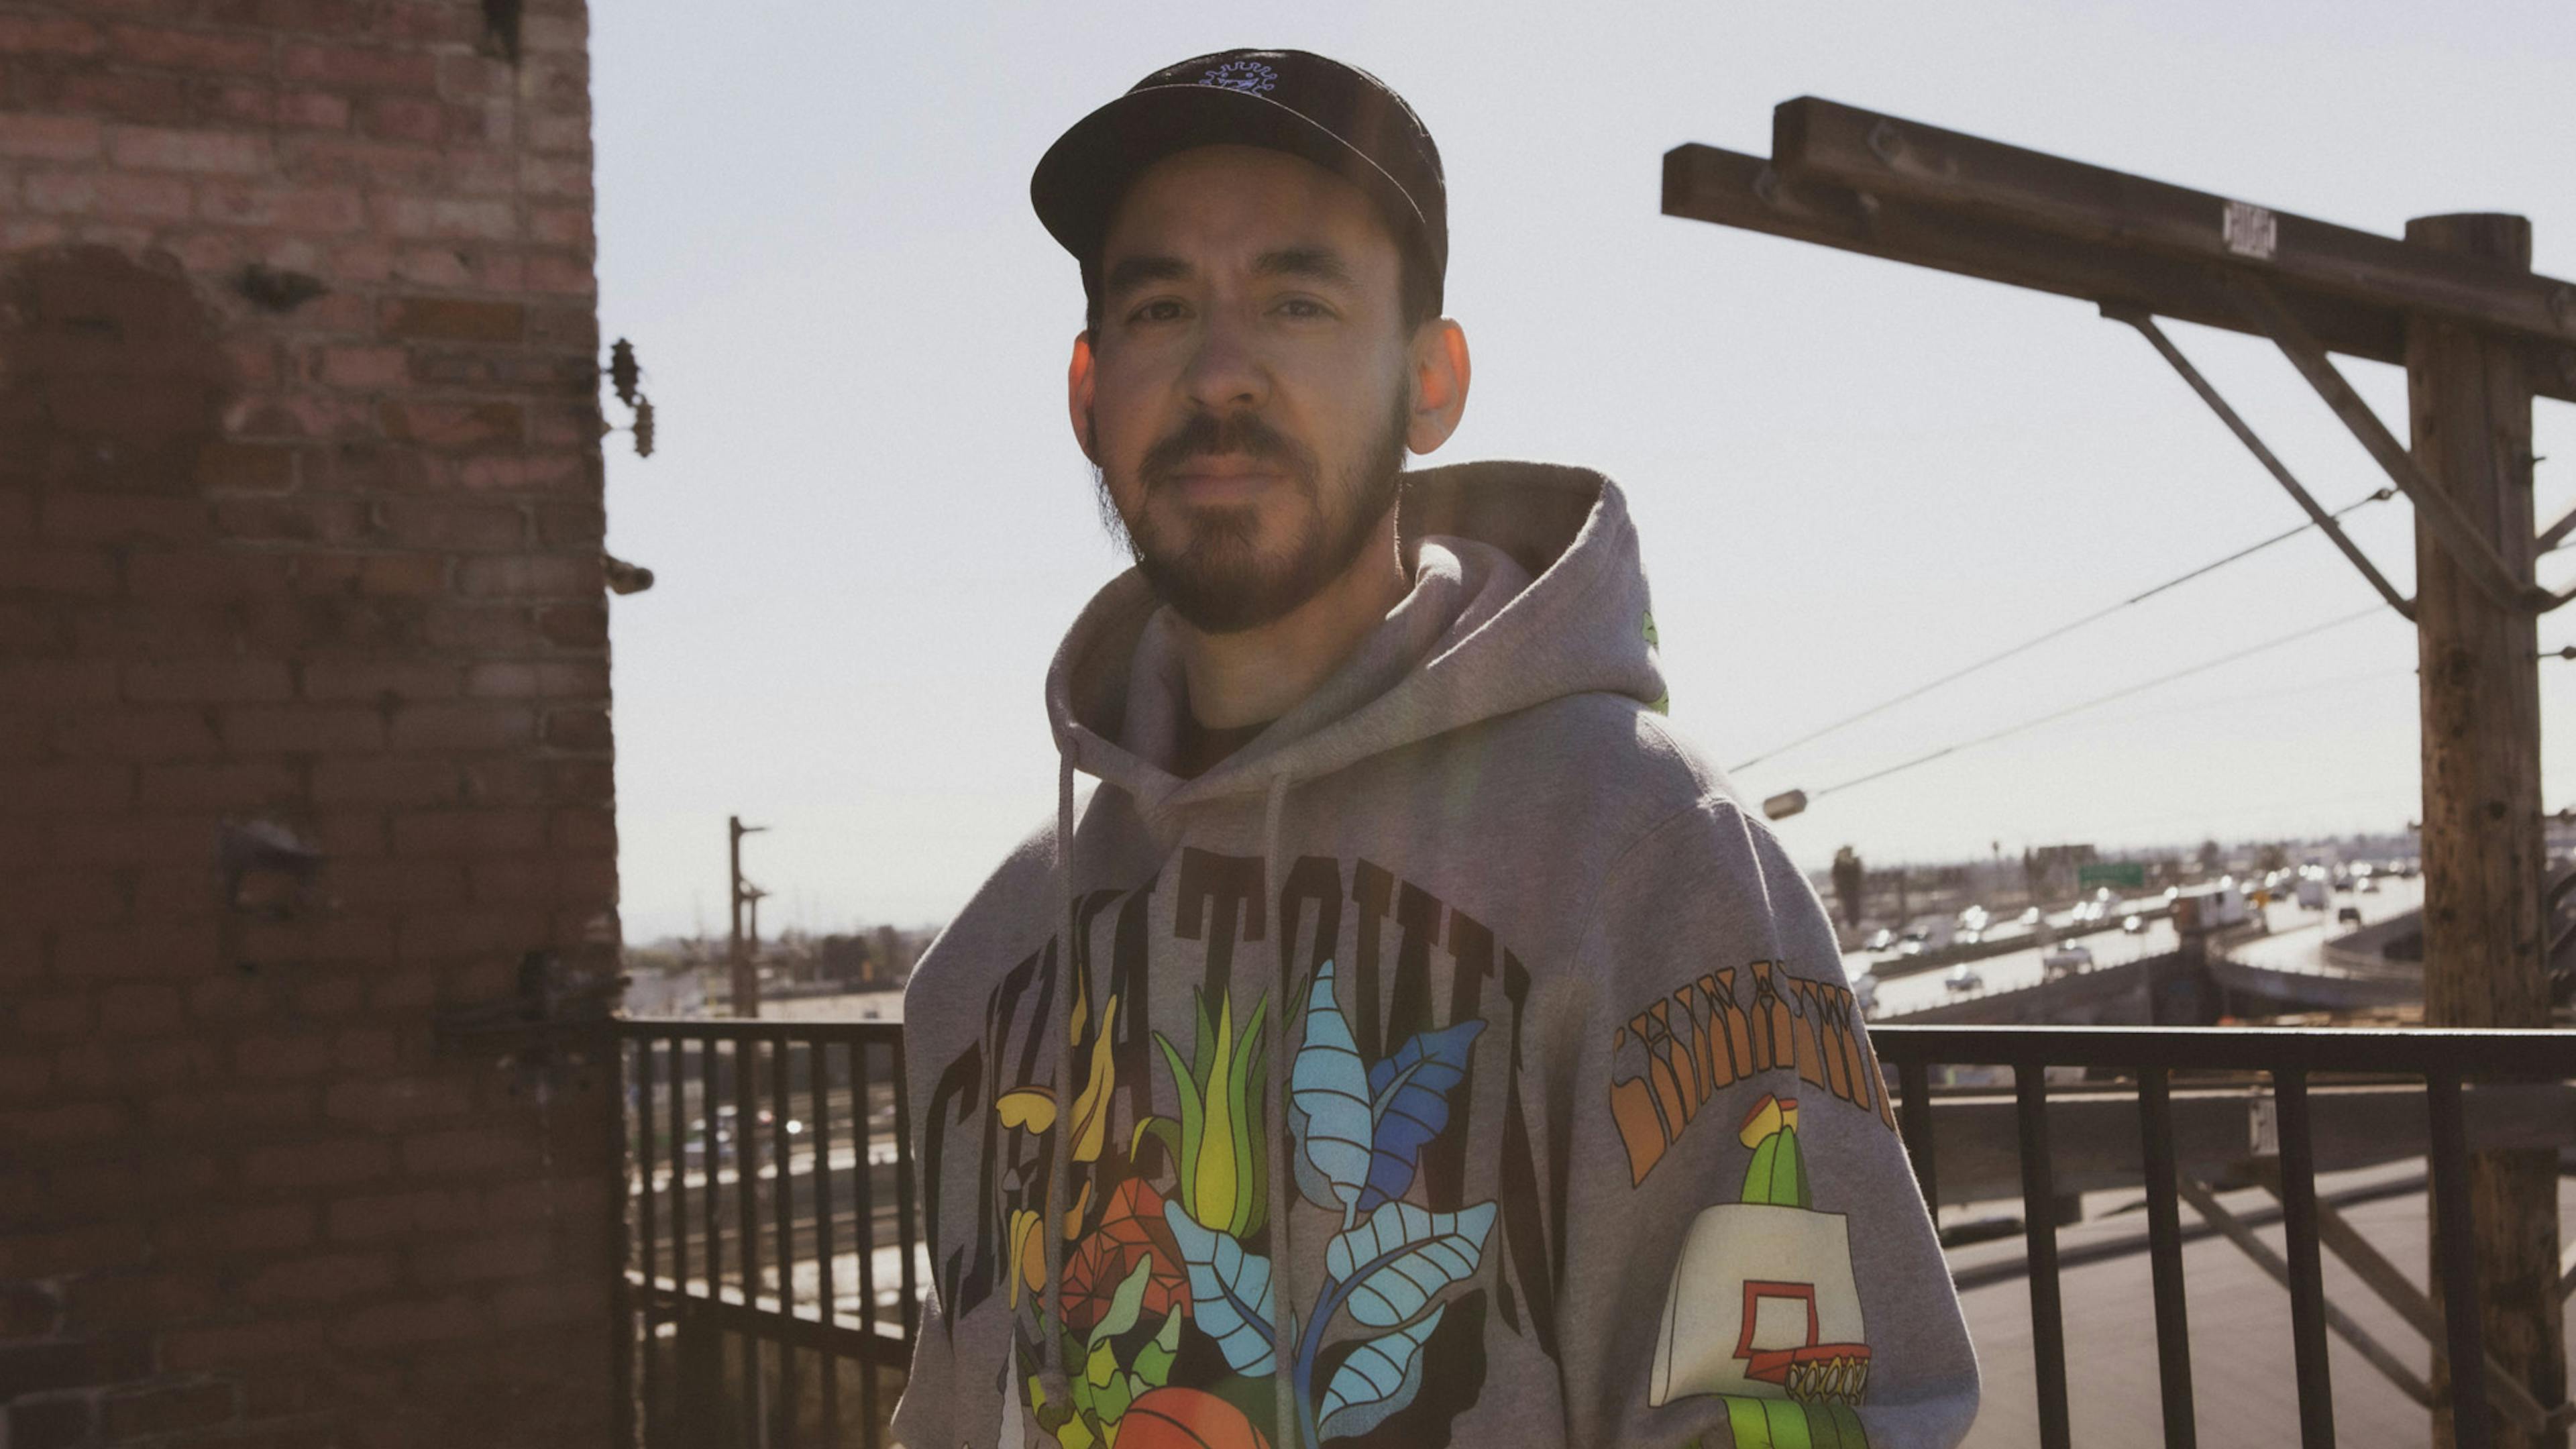 Mike Shinoda unveils new hairstyle along with “new era”